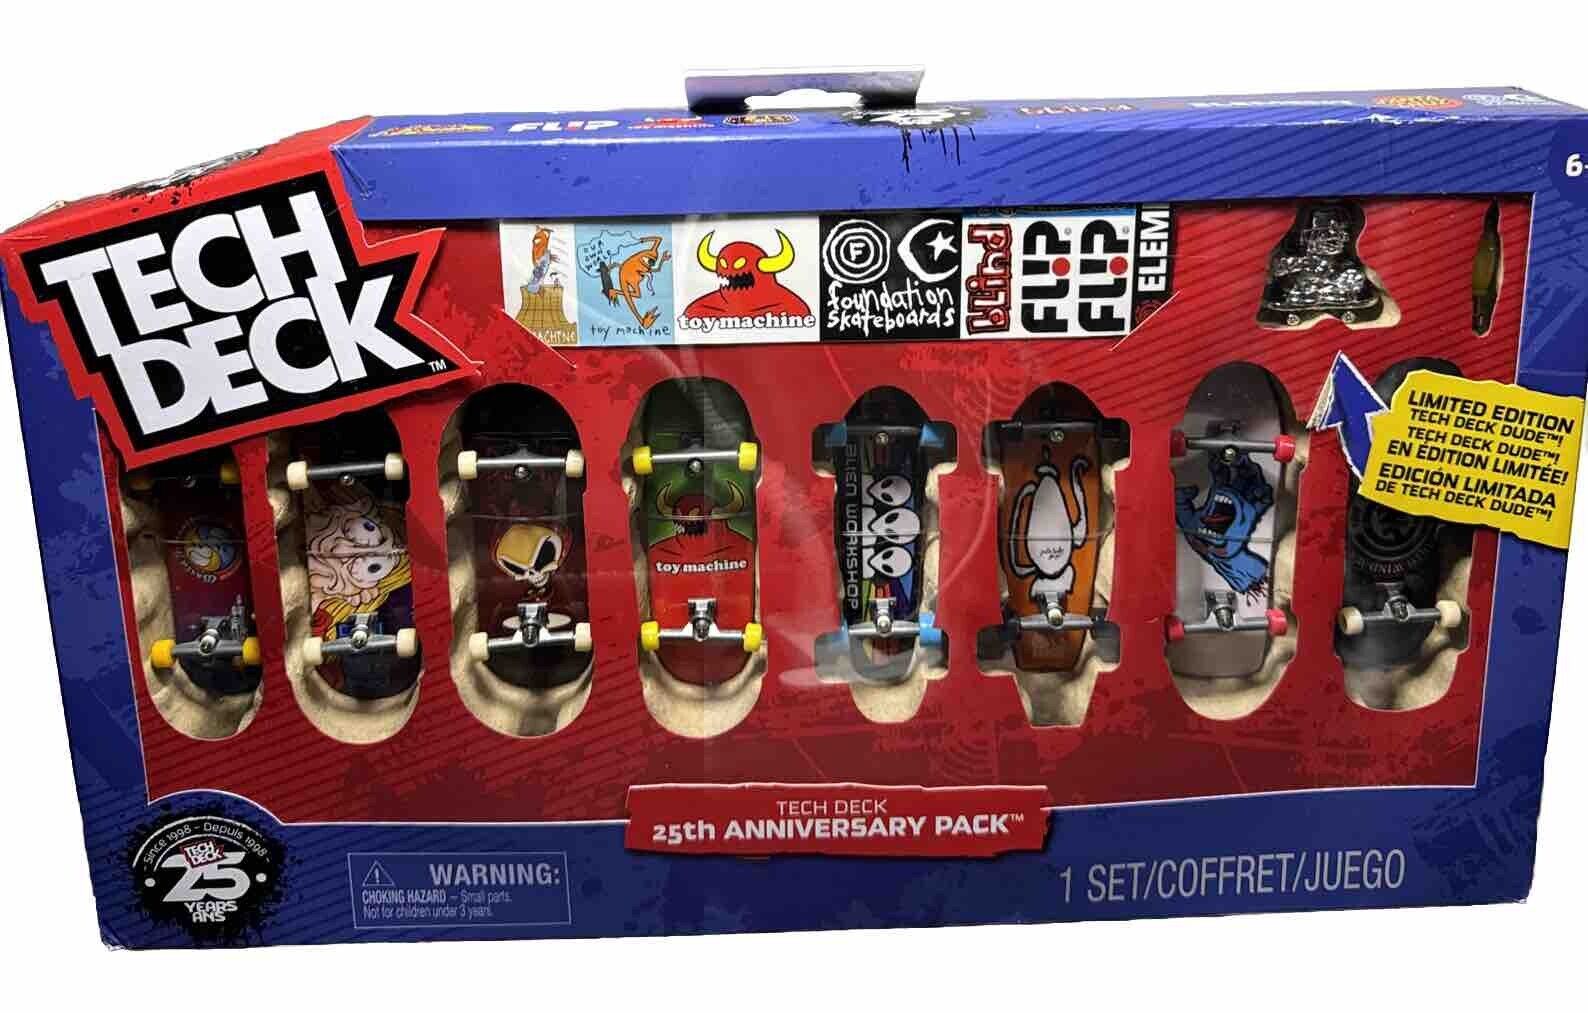 TECH DECK 25th Anniversary Pack 8 Fingerboards Silver Dude Limited Edition Tech Deck